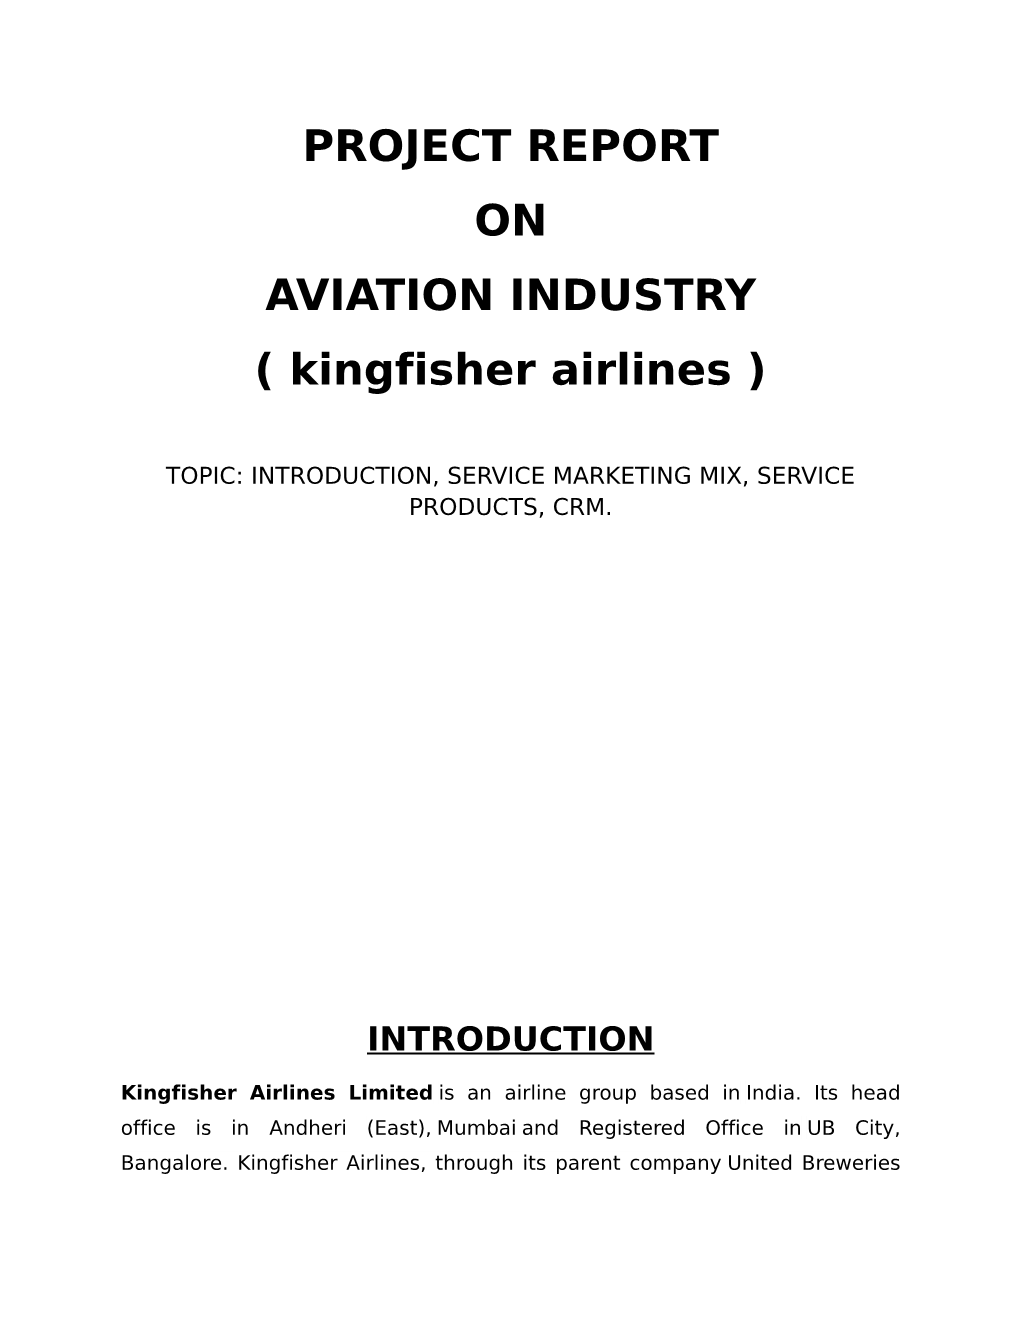 PROJECT REPORT on AVIATION INDUSTRY ( Kingfisher Airlines )